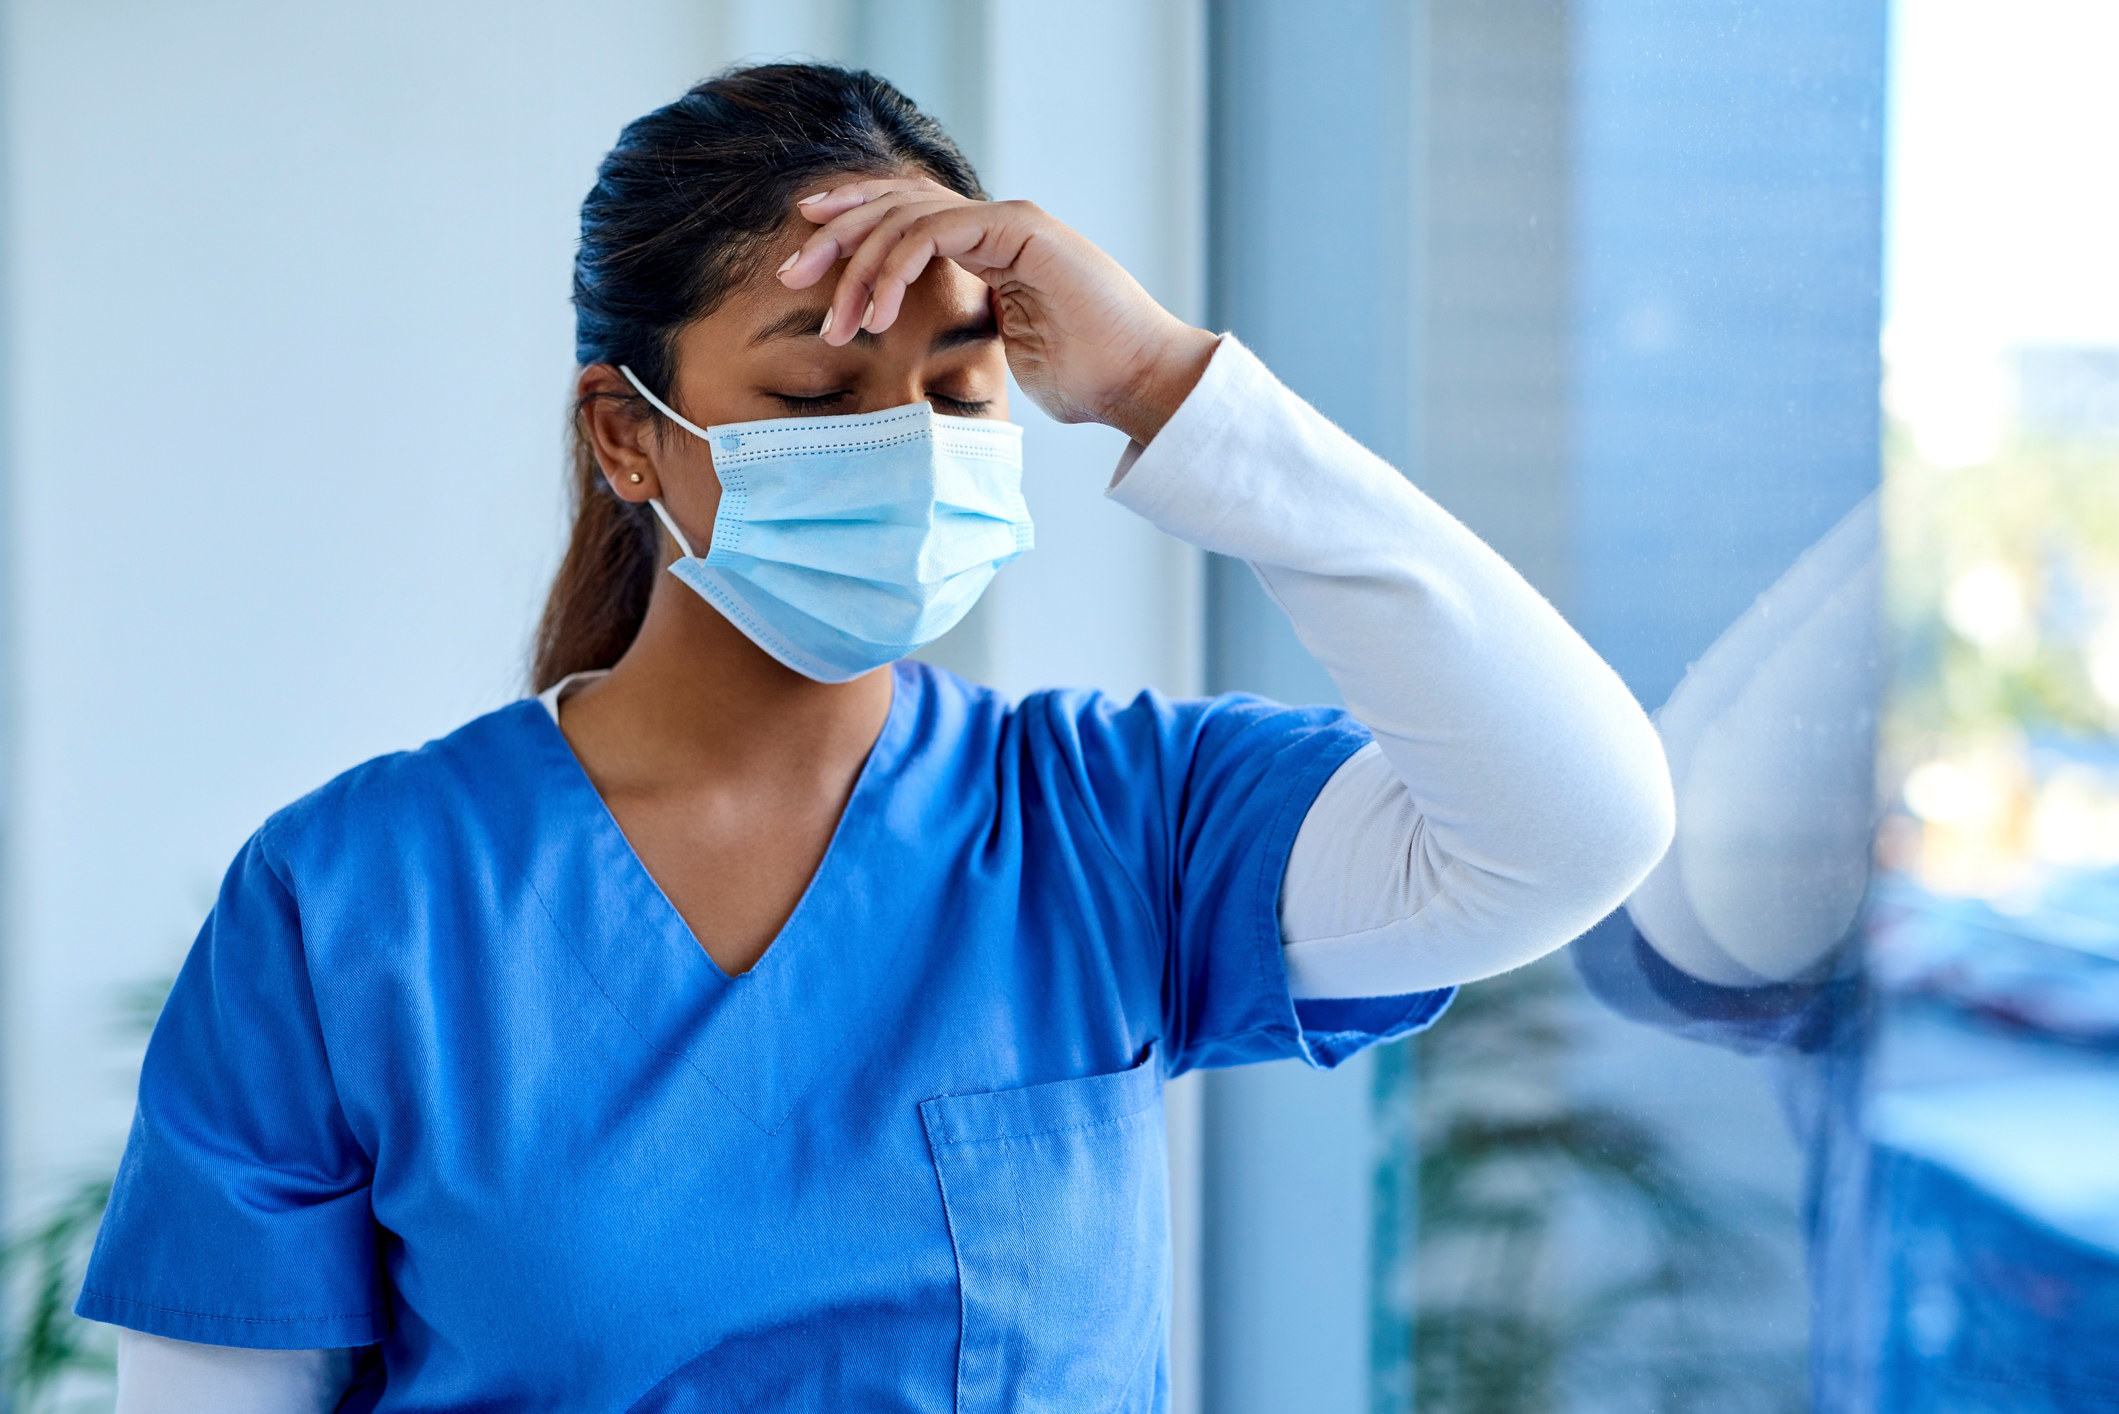 Doctor/nurse wearing mask in hospital, overworked, leaning against glass window during covid